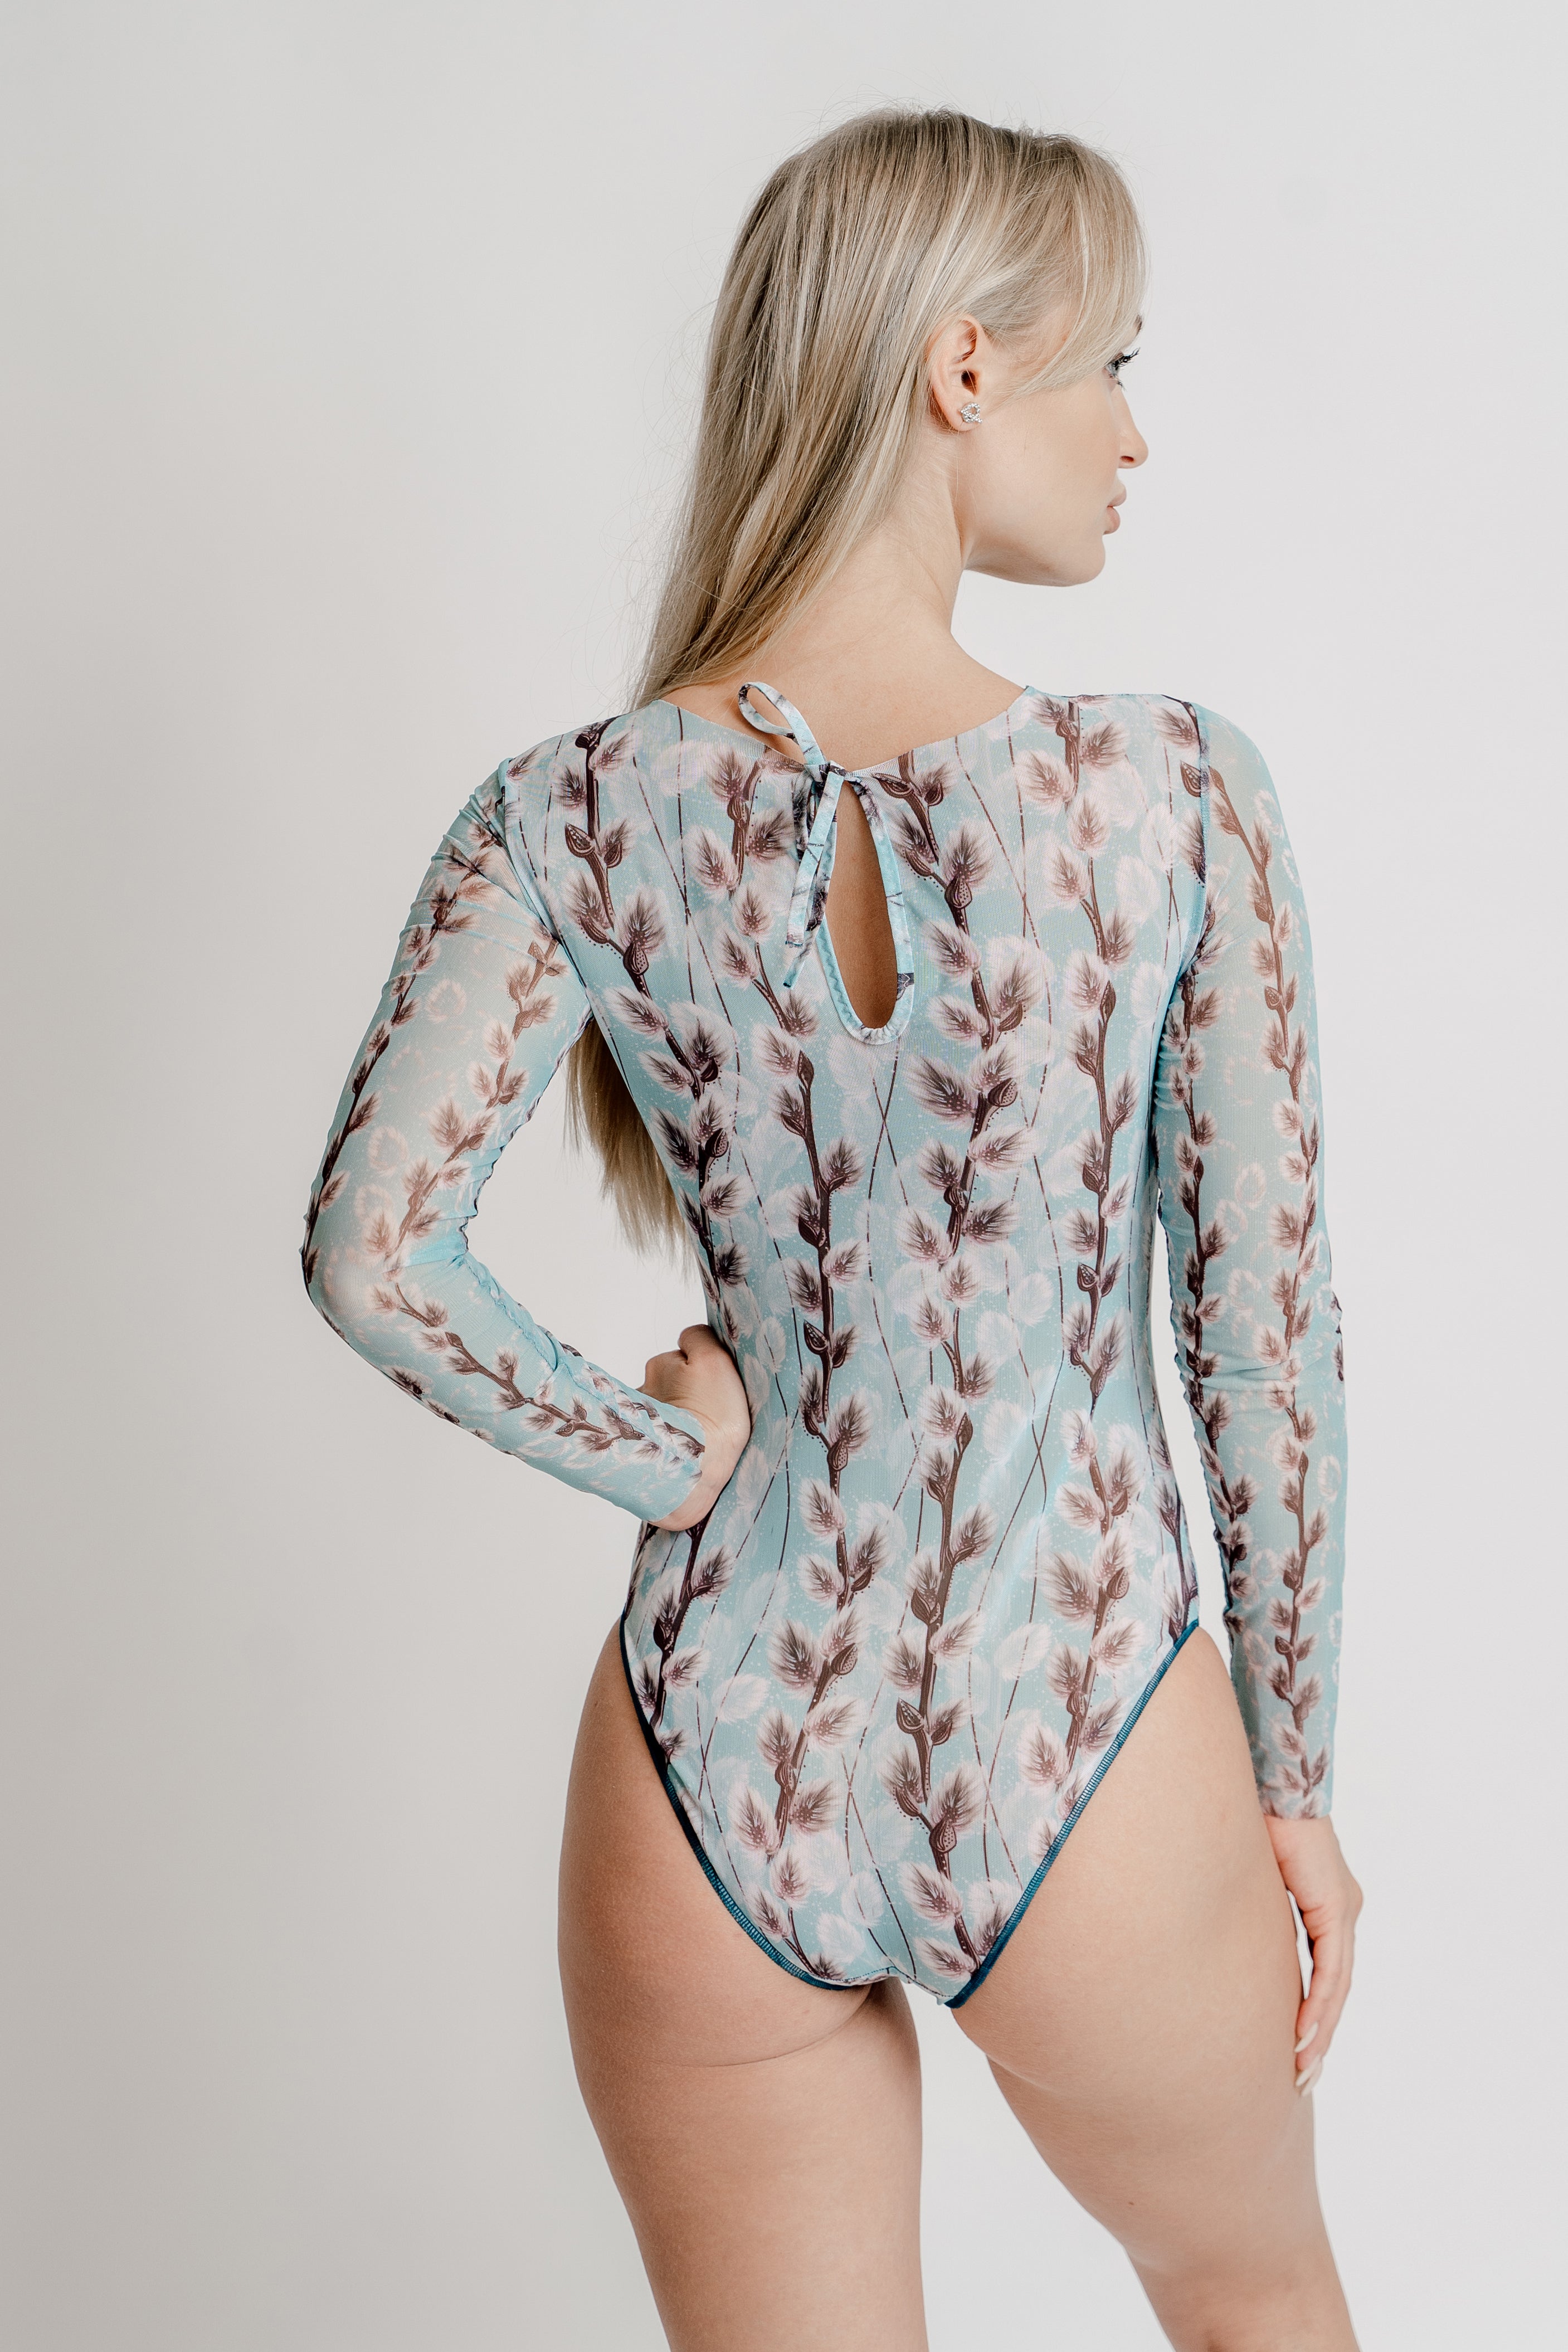 Explore our collection of tan-through swimsuits in the elegant Willow print. With sleeves for extra coverage, these sustainable pieces are now on sale. Experience classic luxury with a modern twist.